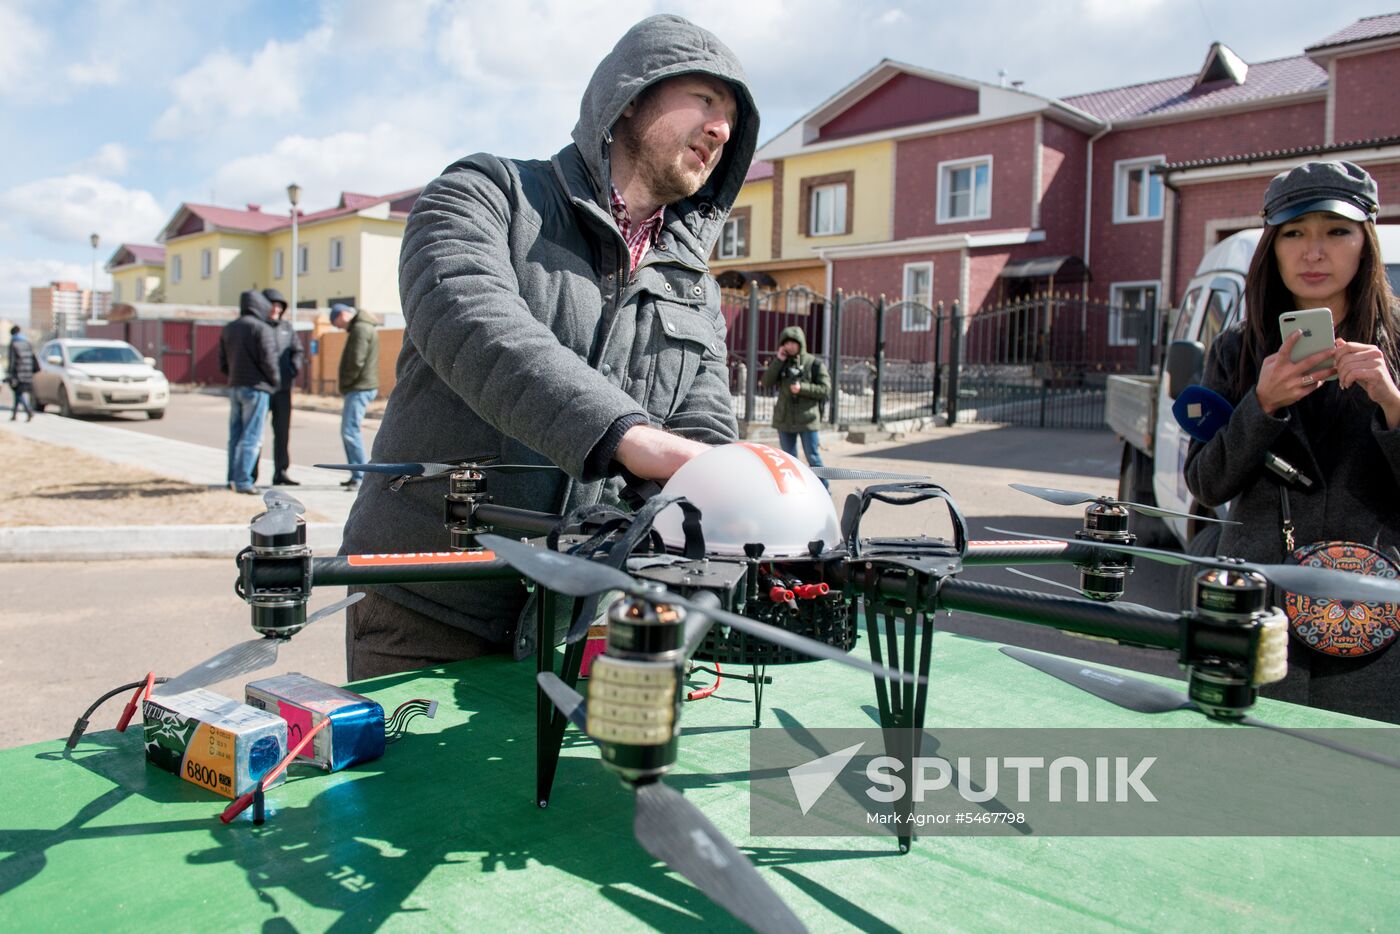 Russian Post's drone tested